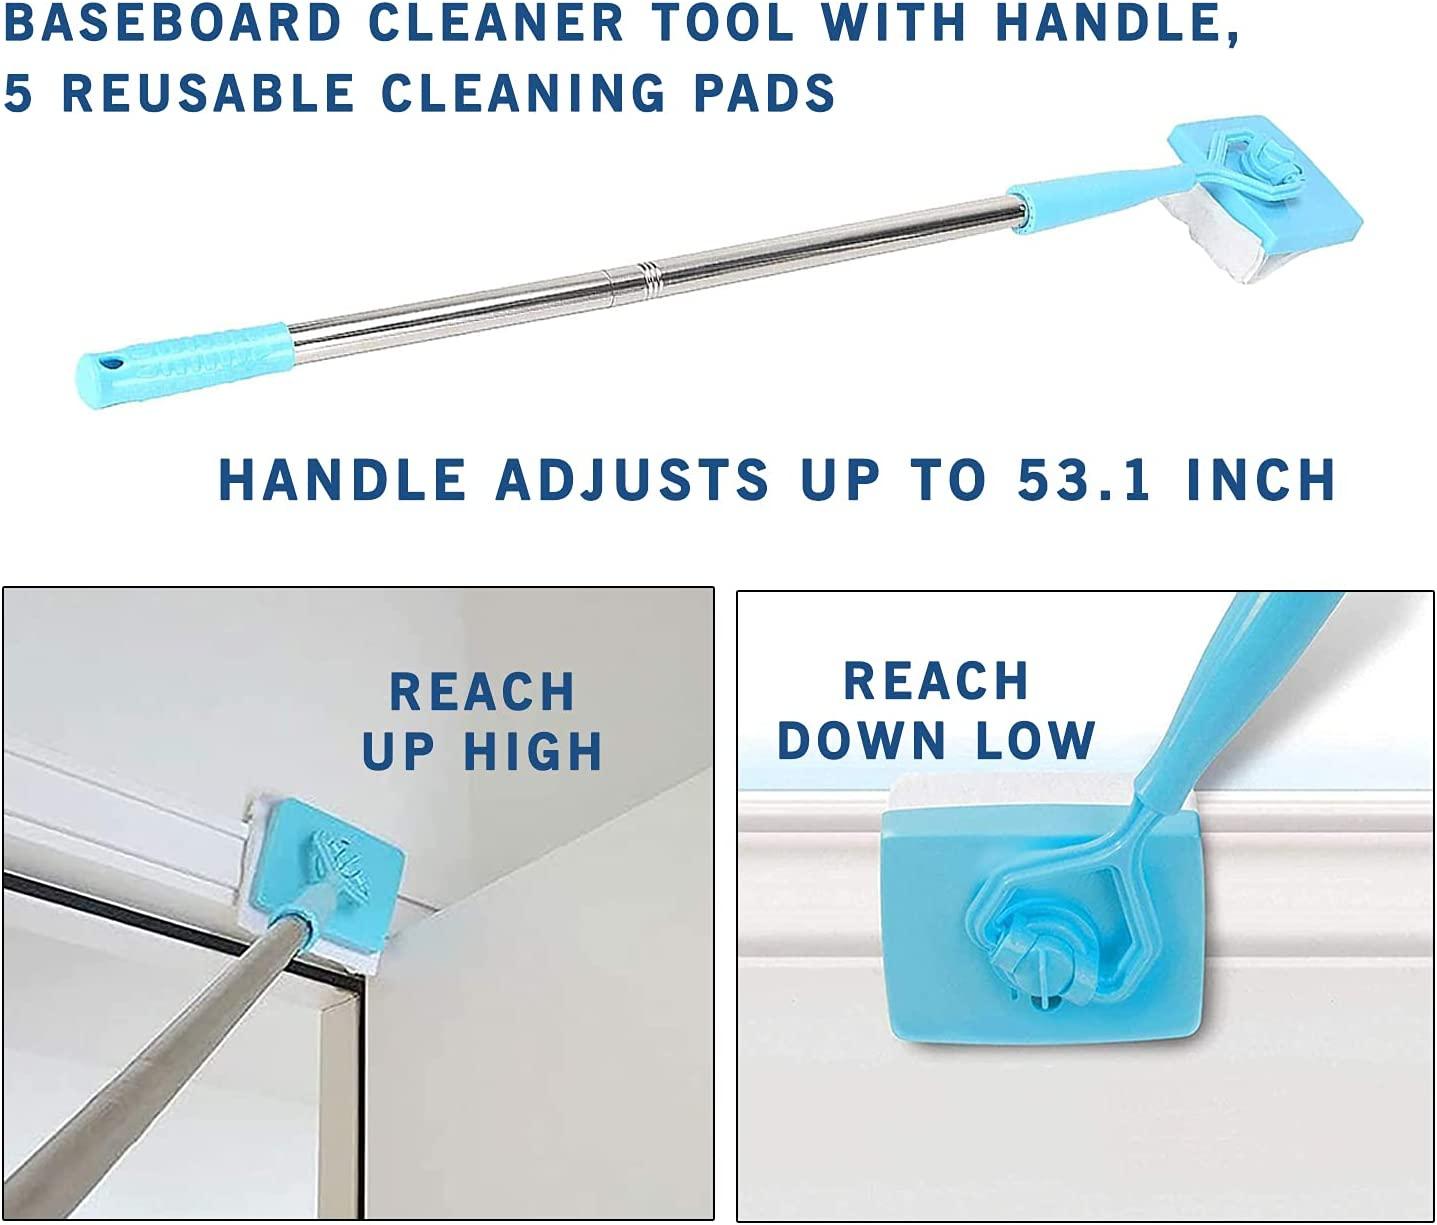 CloudyPeak Baseboard Cleaner Tool with Handle 5 Reusable Cleaning Pads by No-Bending Mop Baseboard Cleaner Tool Long Handle Adjustable Baseboard Molding Tool